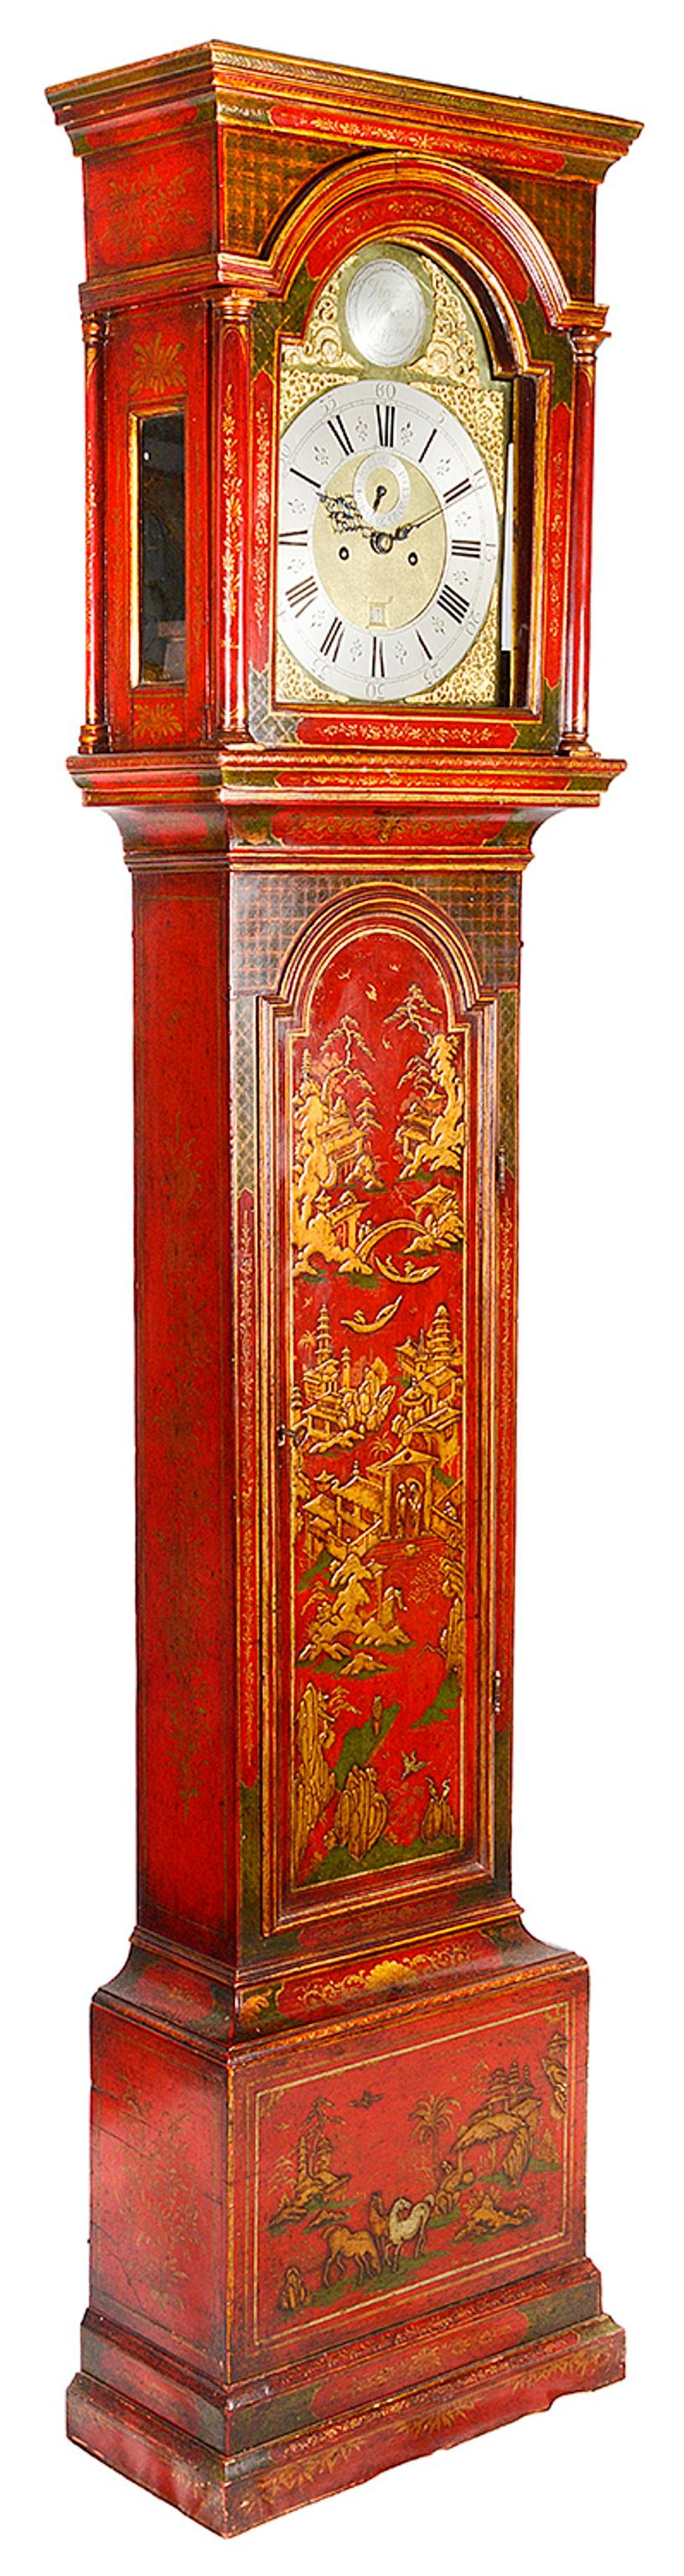 Early 19th century Chinoiserie Red lacquer grandfather clock, having an arched dial, brass faced, eight day striking movement, by Abraham Glascock of Epping.
Gilded hand painted oriental scenes and decoration to the case.